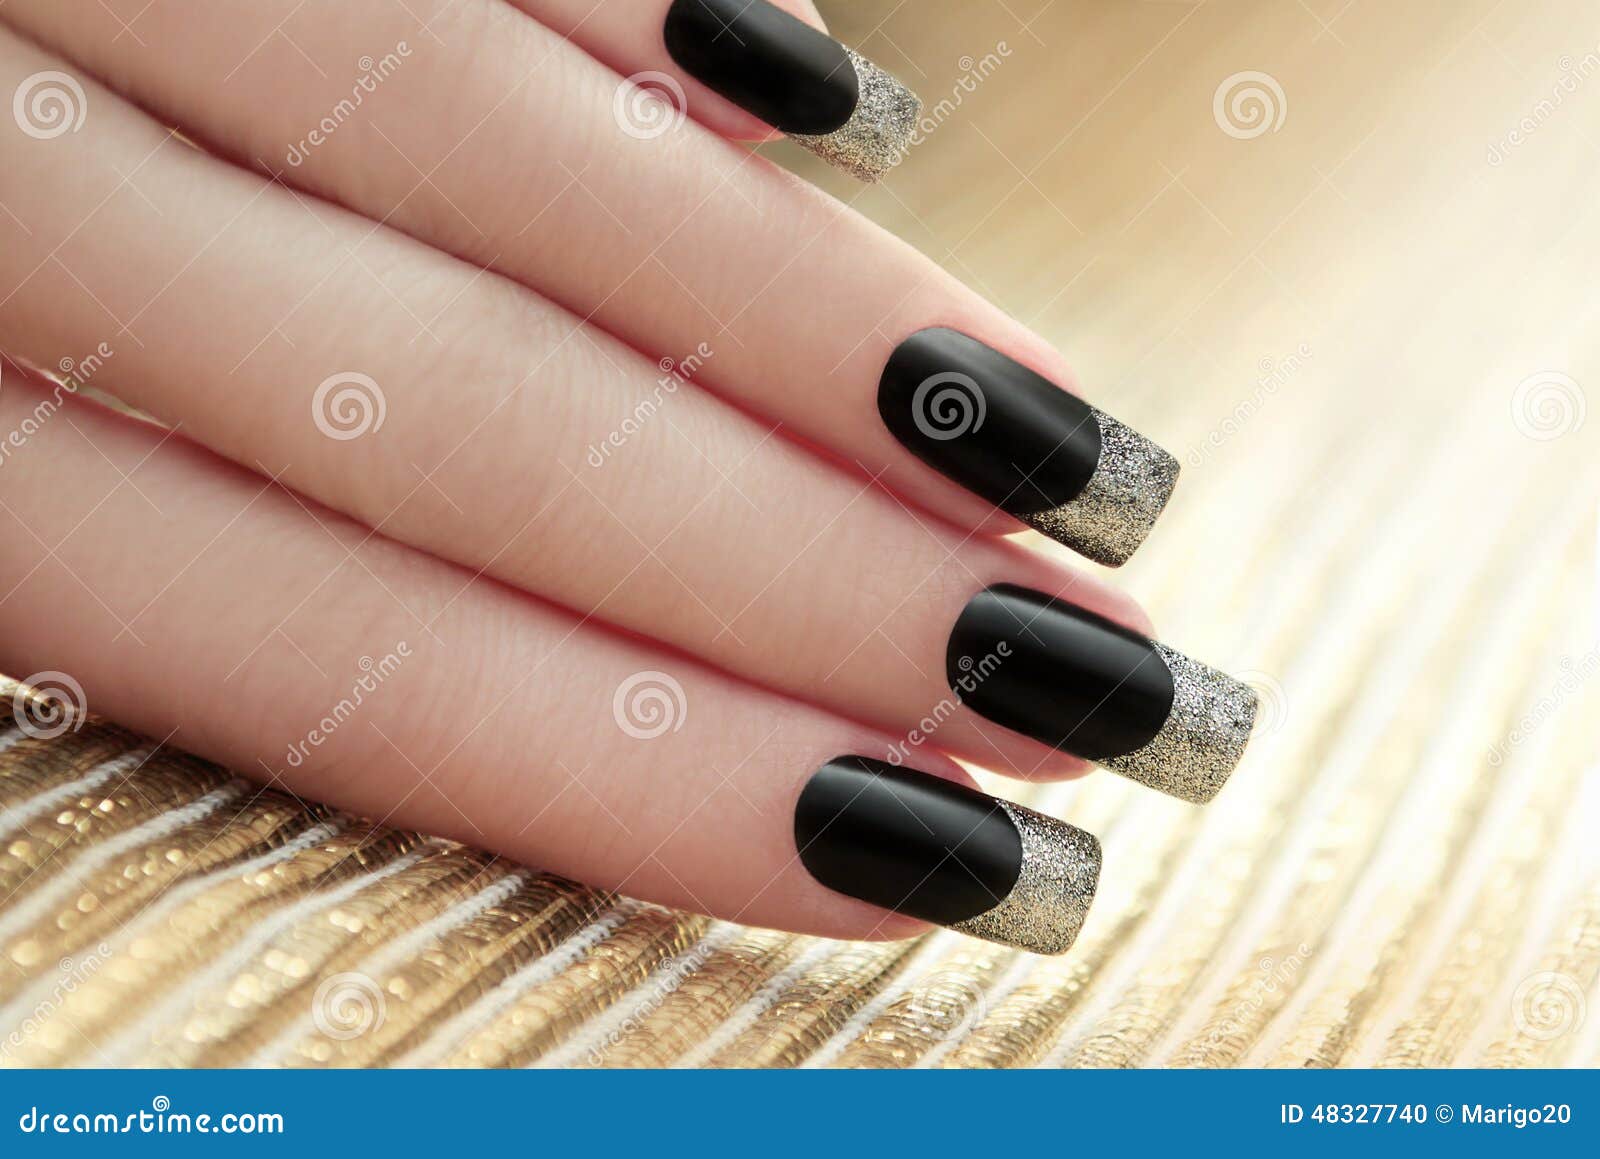 black french manicure.